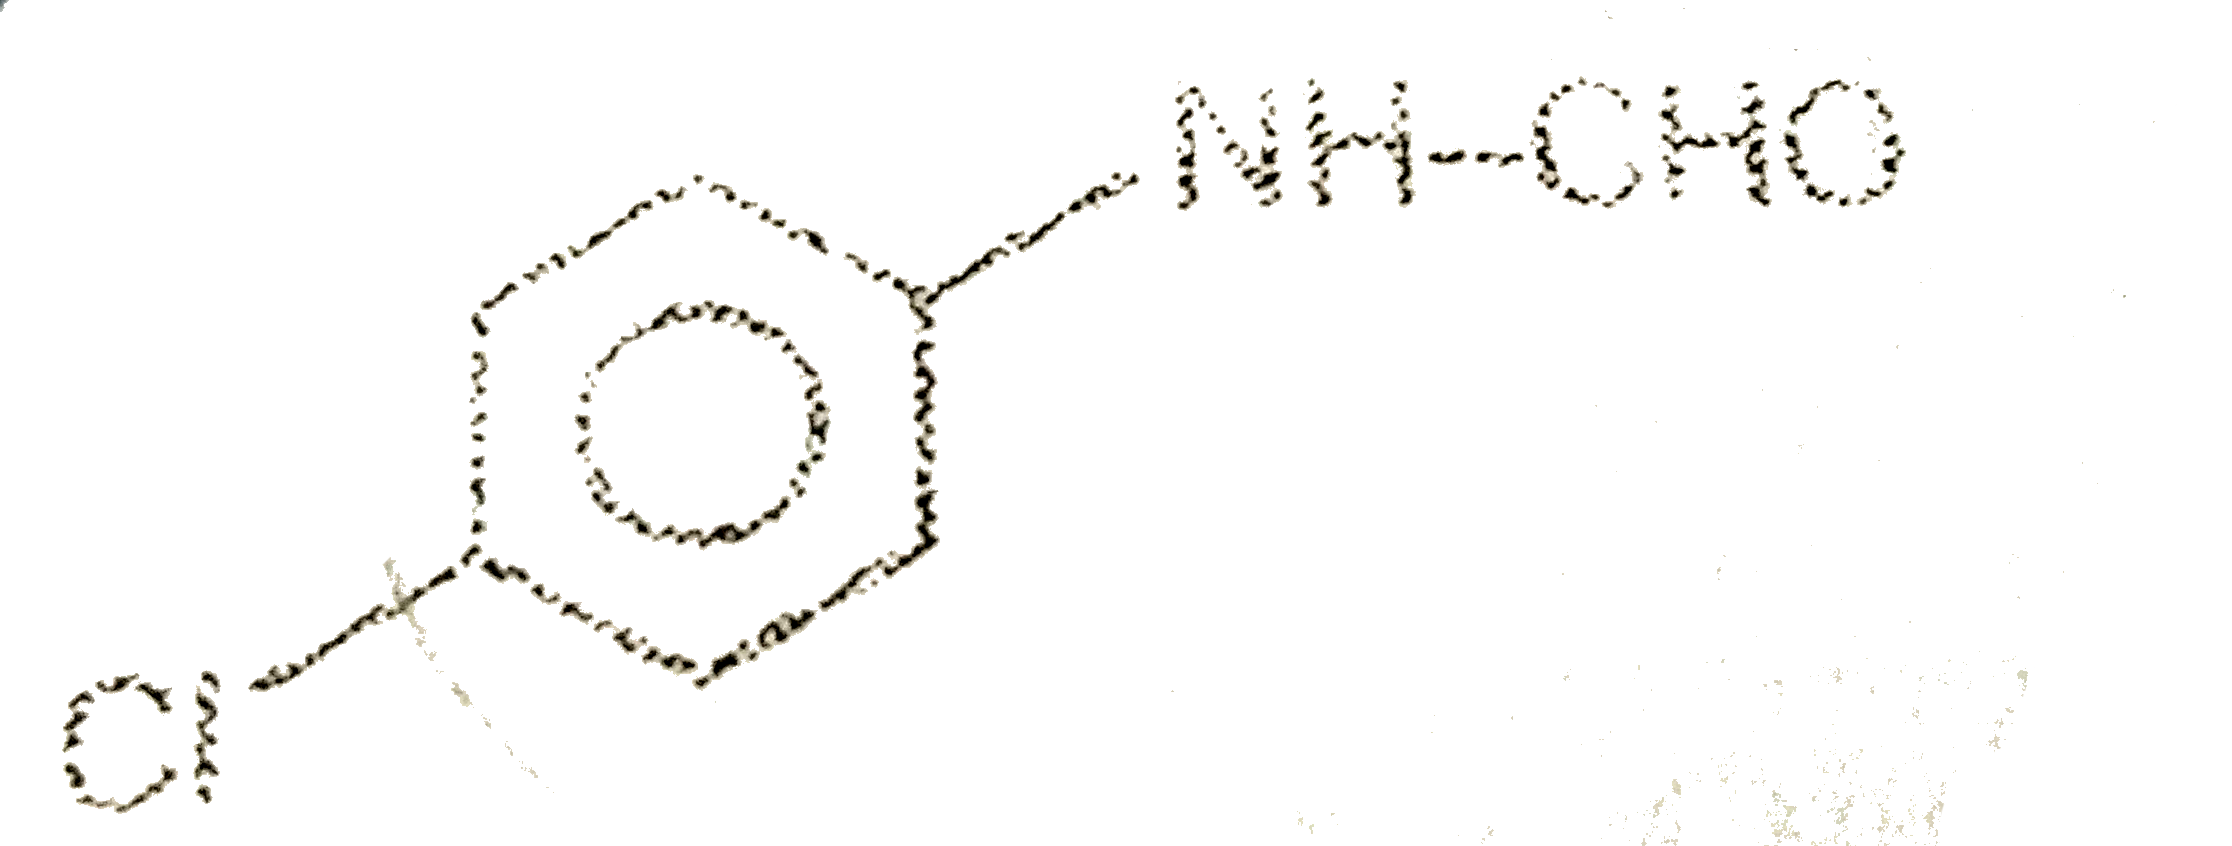 The correct IUPAC name of the compound.